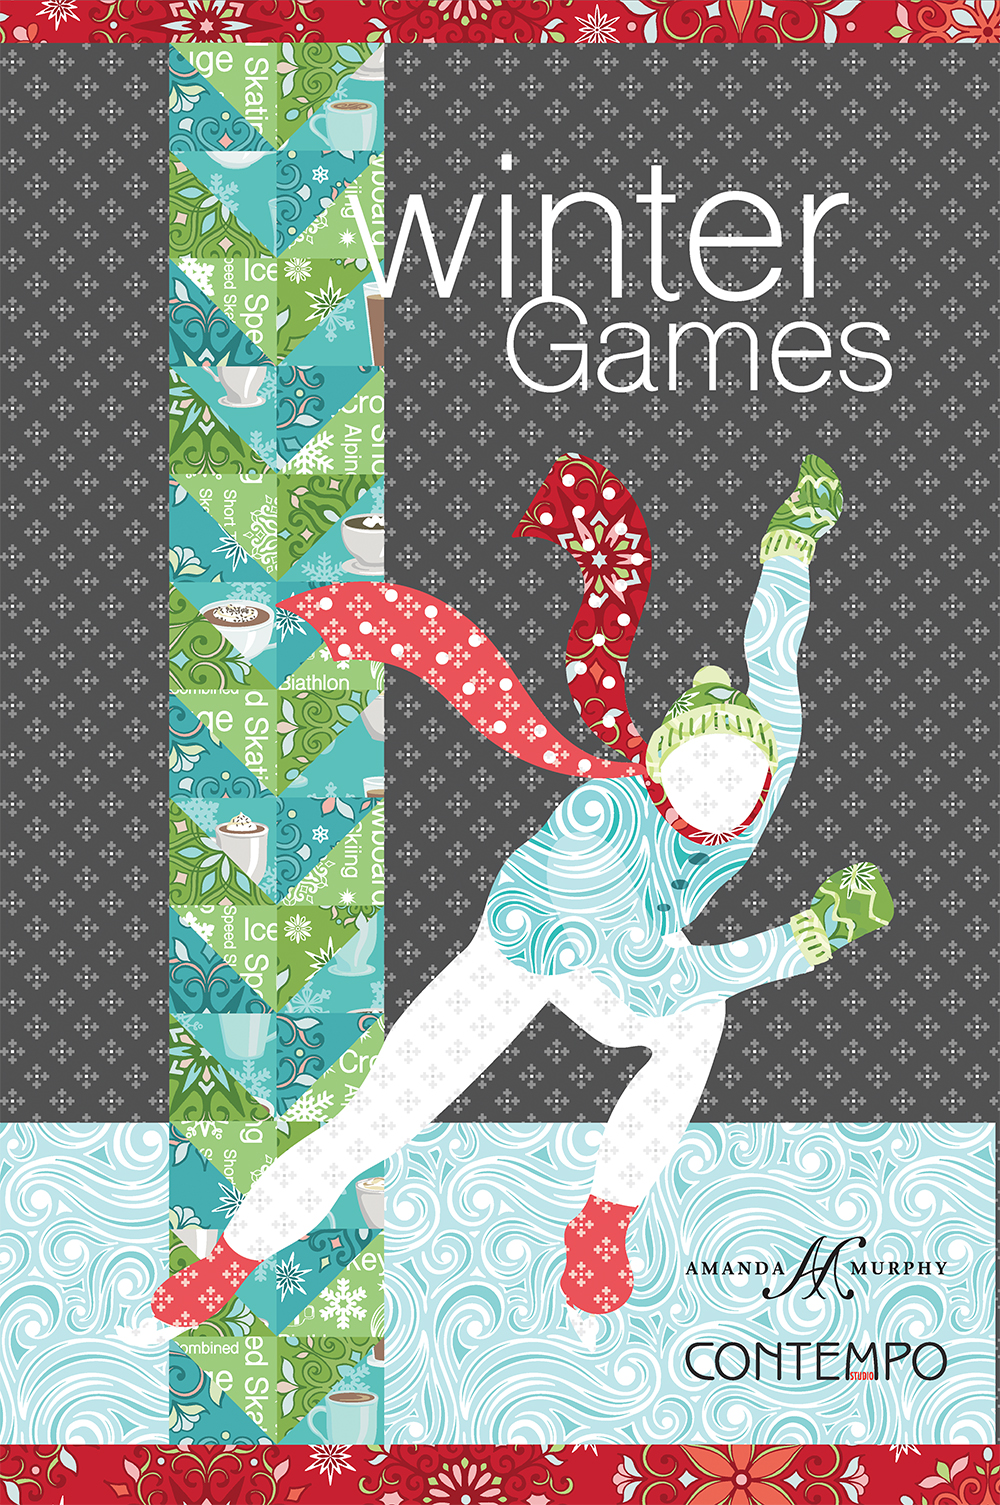 Introducing Winter Games (and a blog hop with giveaways)!